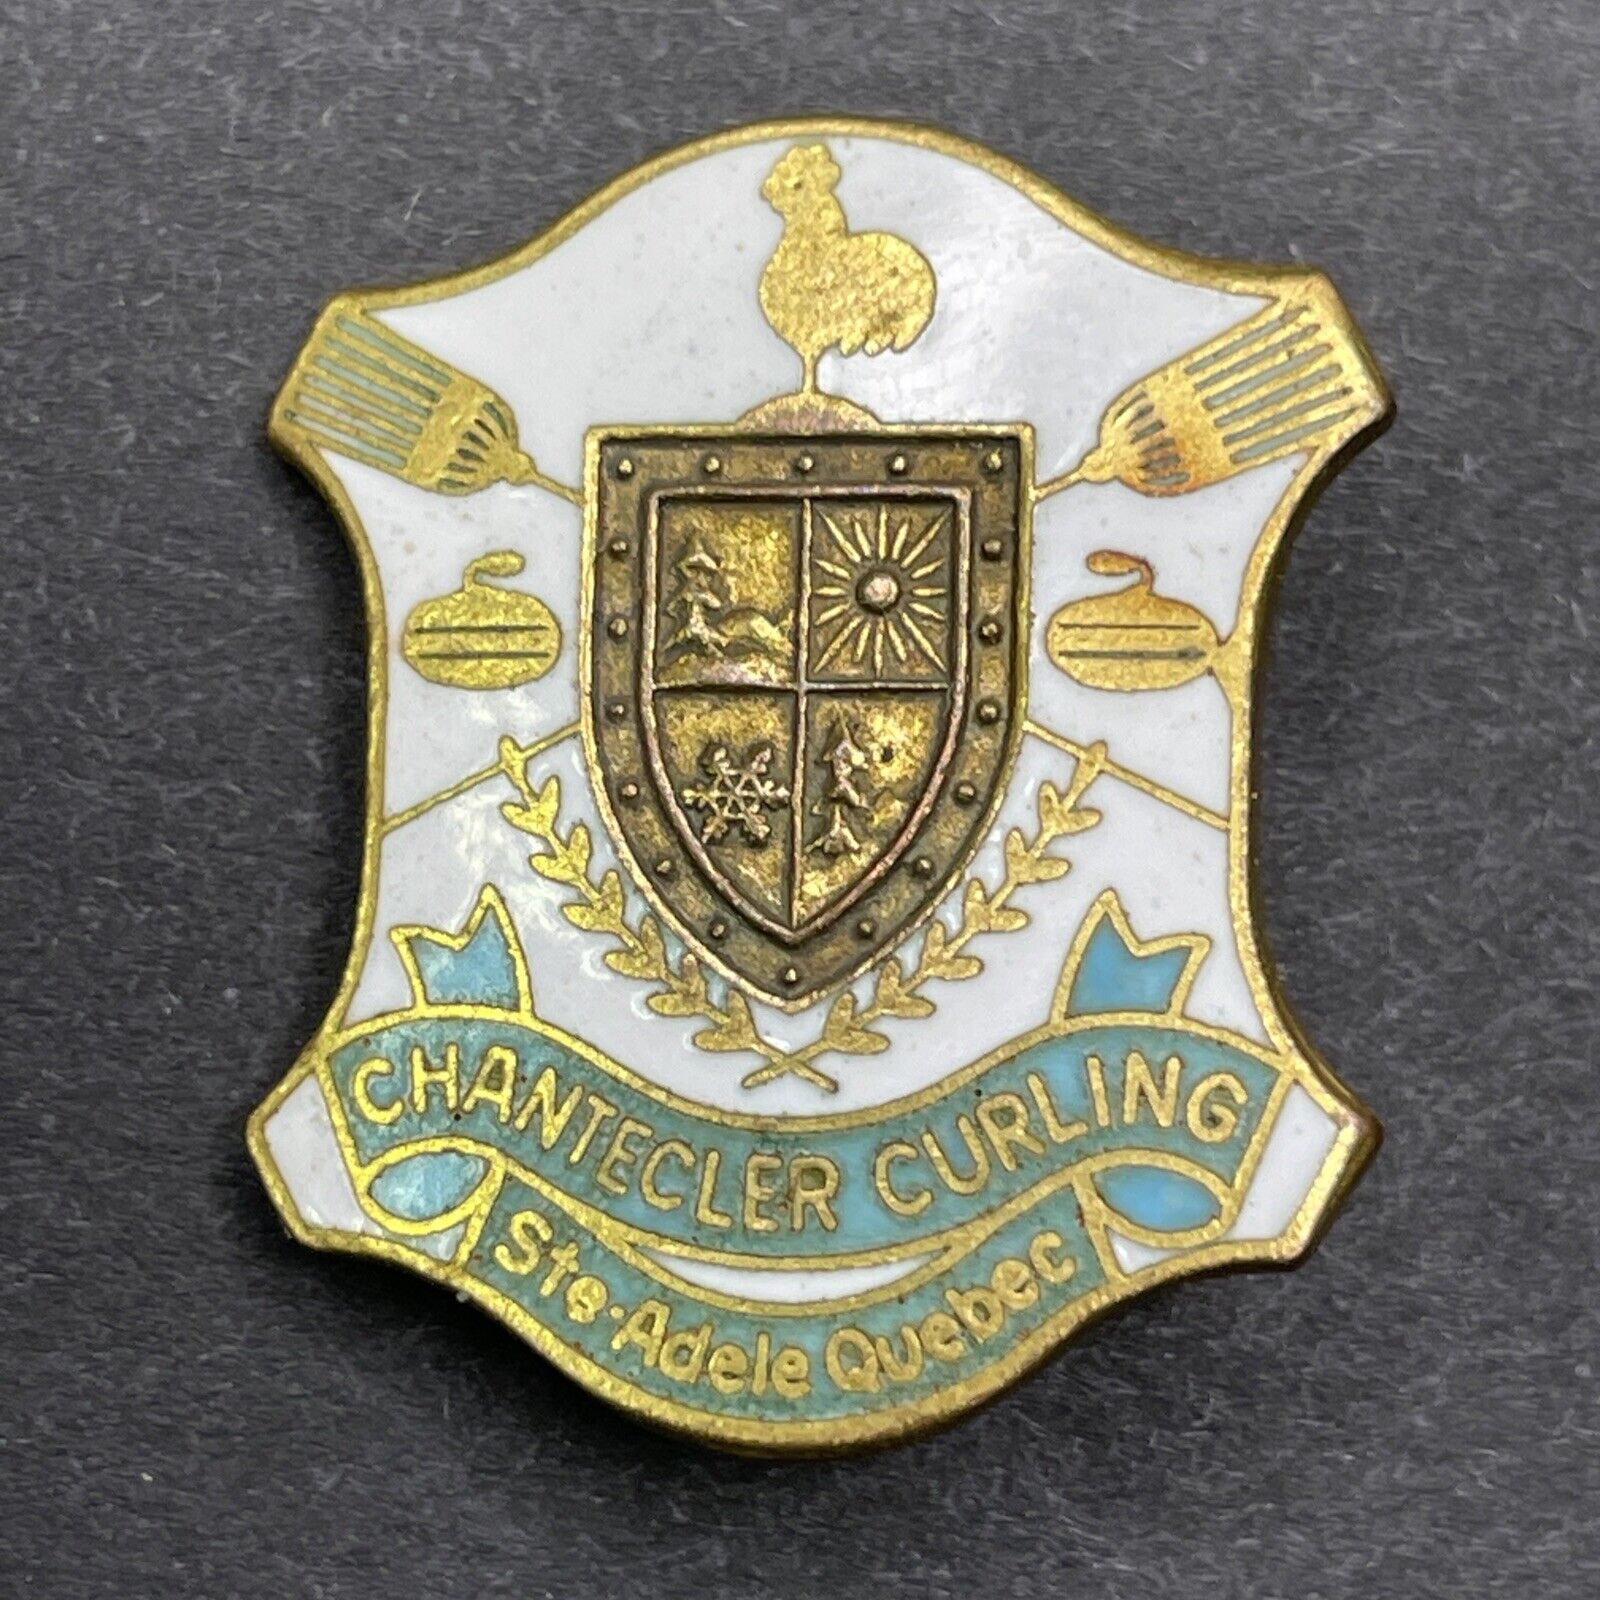 Vintage 1950s Chantecler Curling Club Membership Pin Ste-Adele Quebec Canada